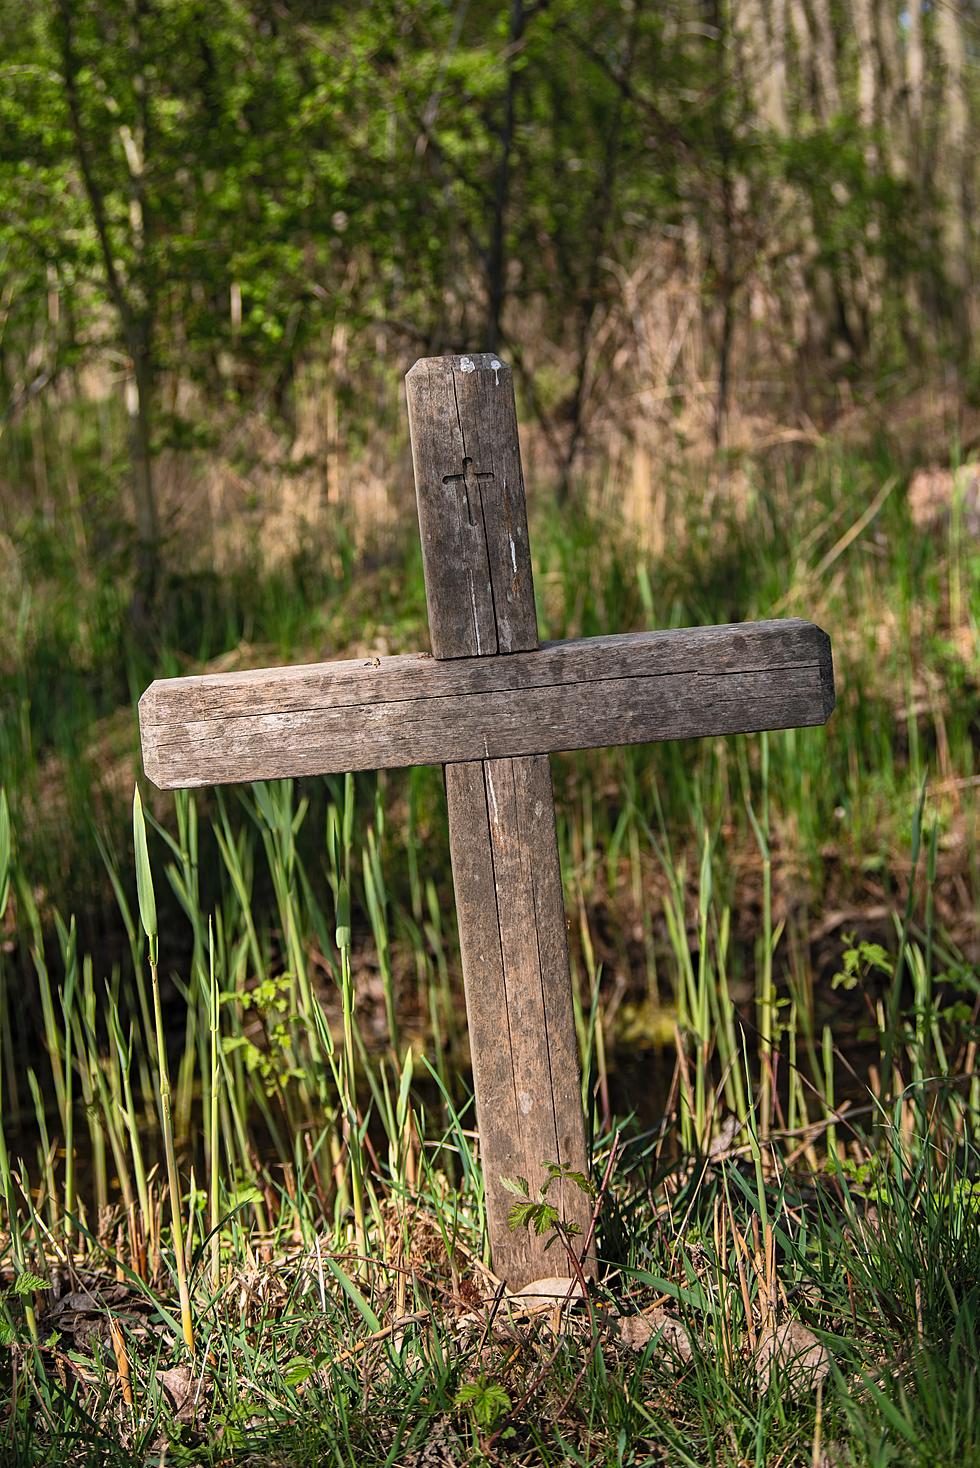 Can You Legally Bury A Family Member On Your Property In Wisconsin?